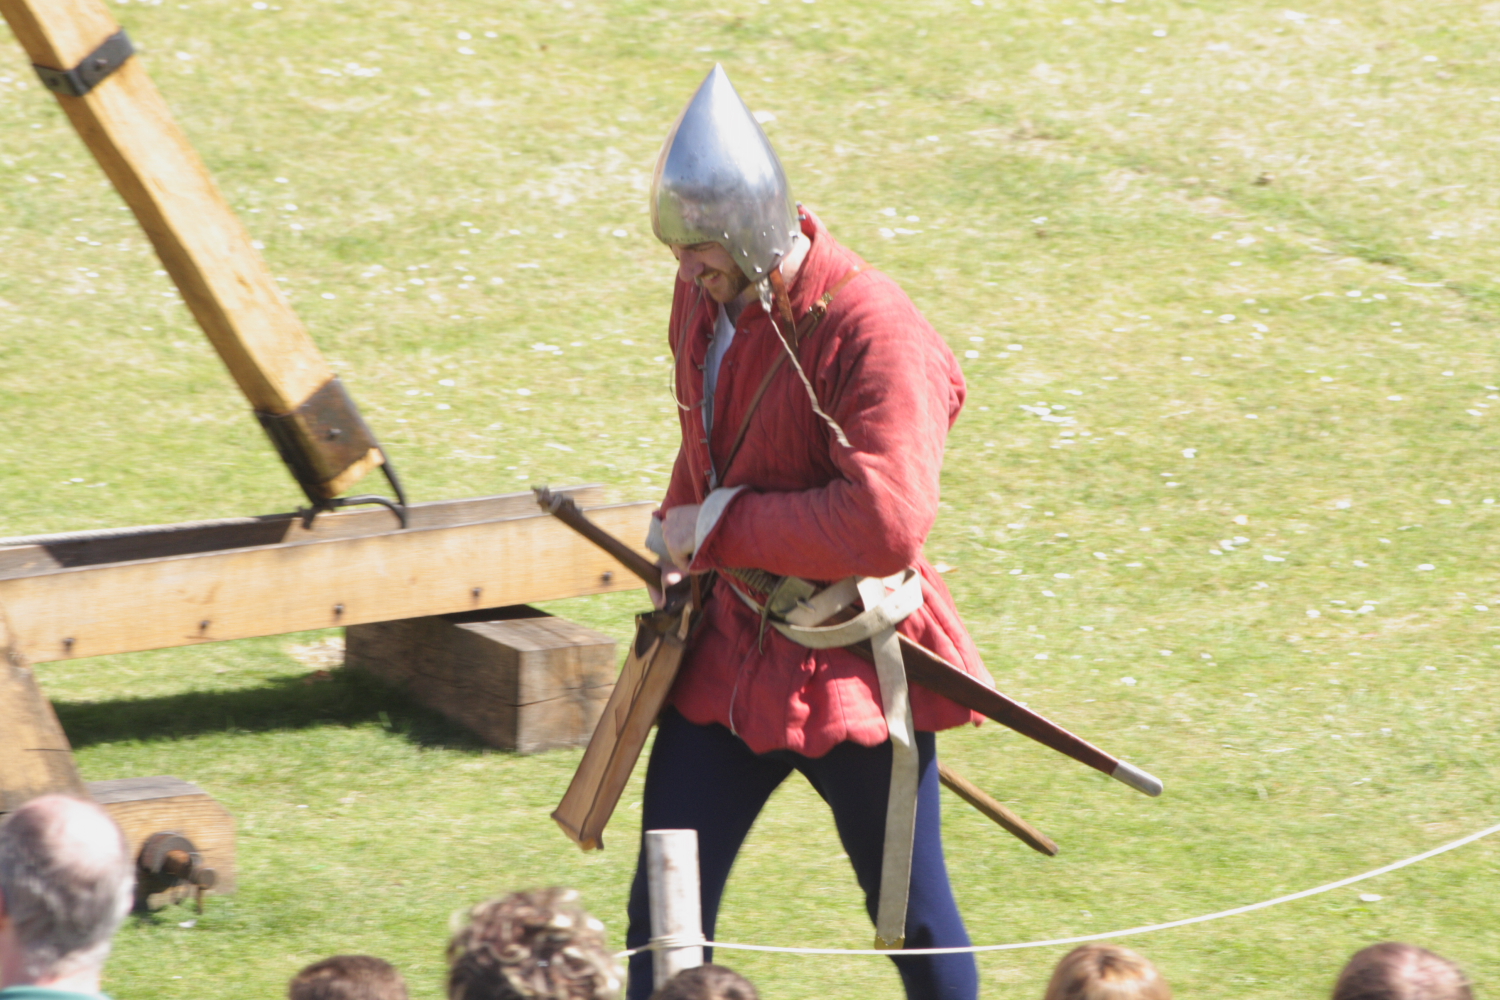 Siege Warfare demonstration at the Tower of London